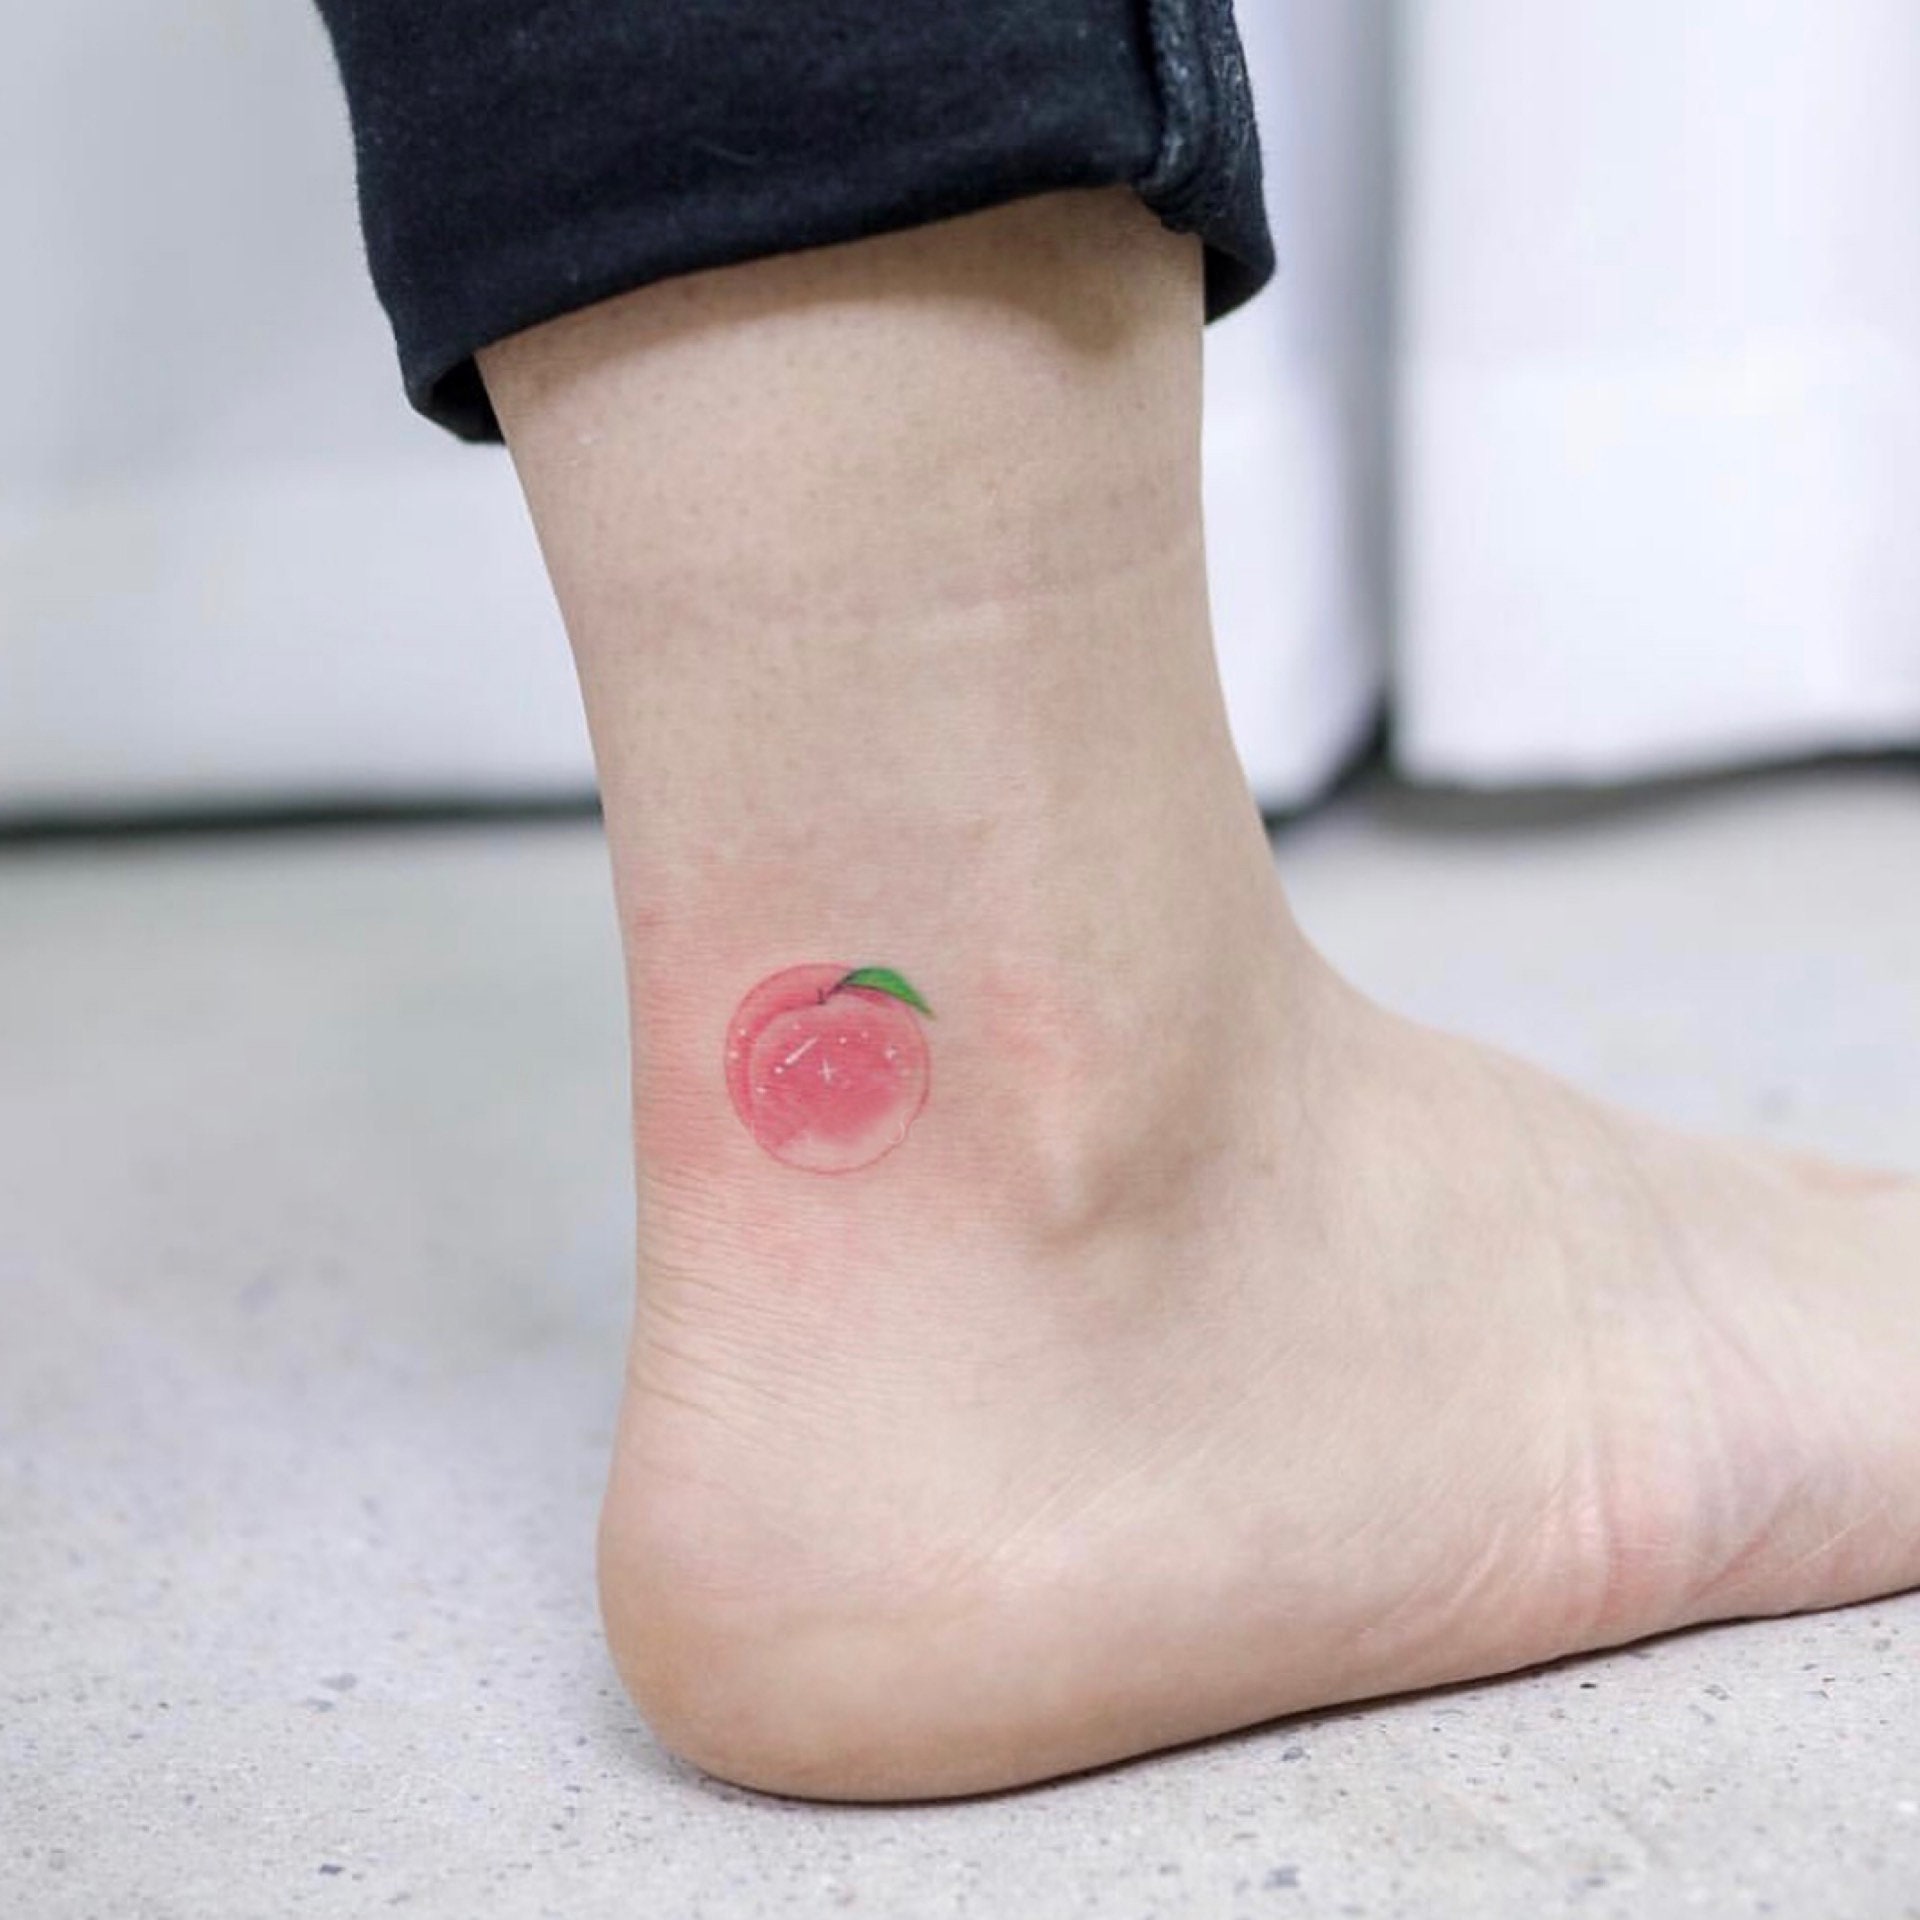 26 Delicate And Sweet Peach Tattoo Designs Ideas To Inspire Your Next Ink